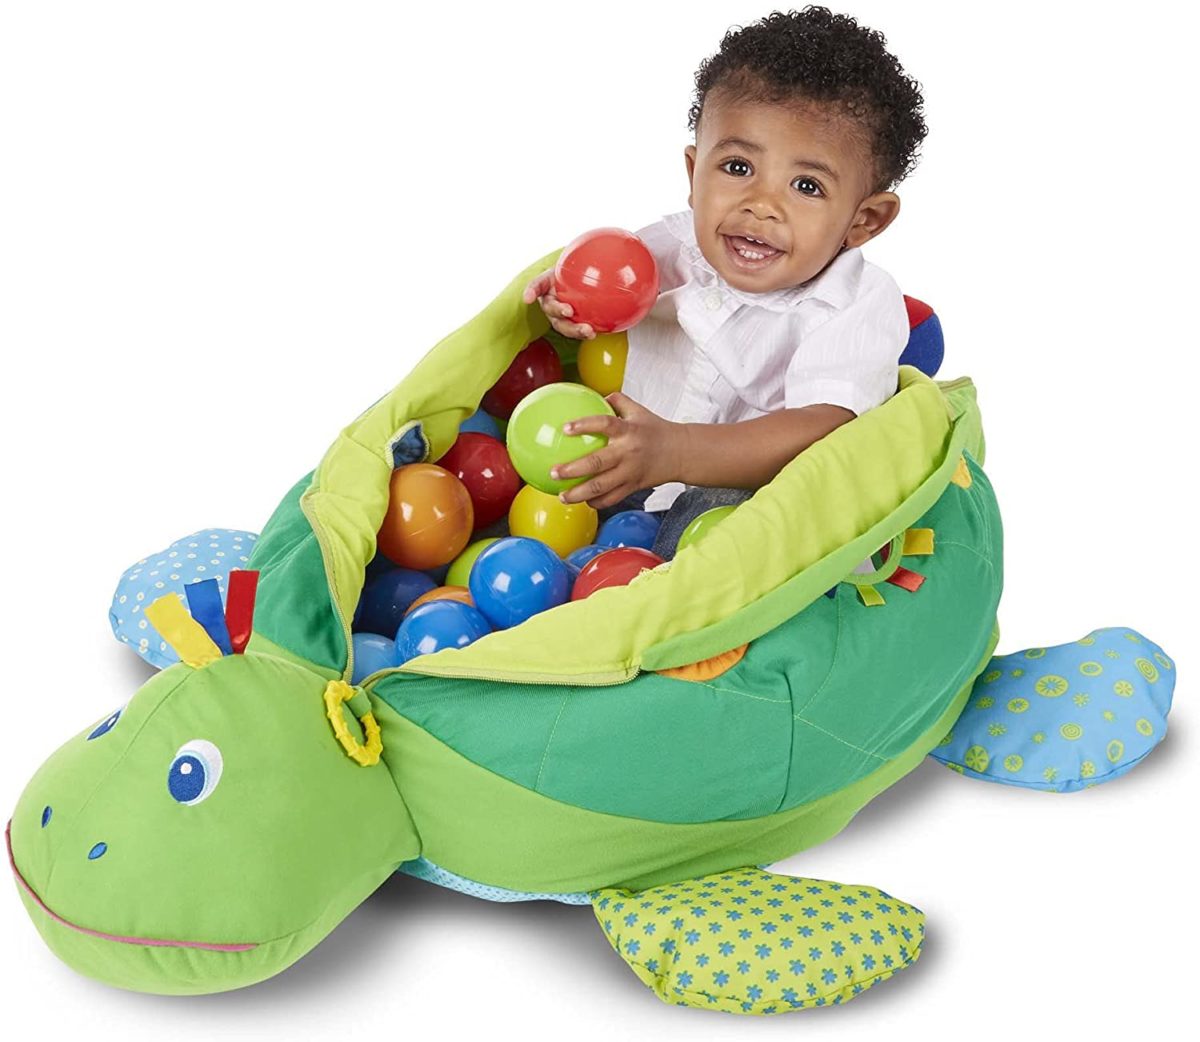 Find the Best Baby Ball Pit for Your Little One